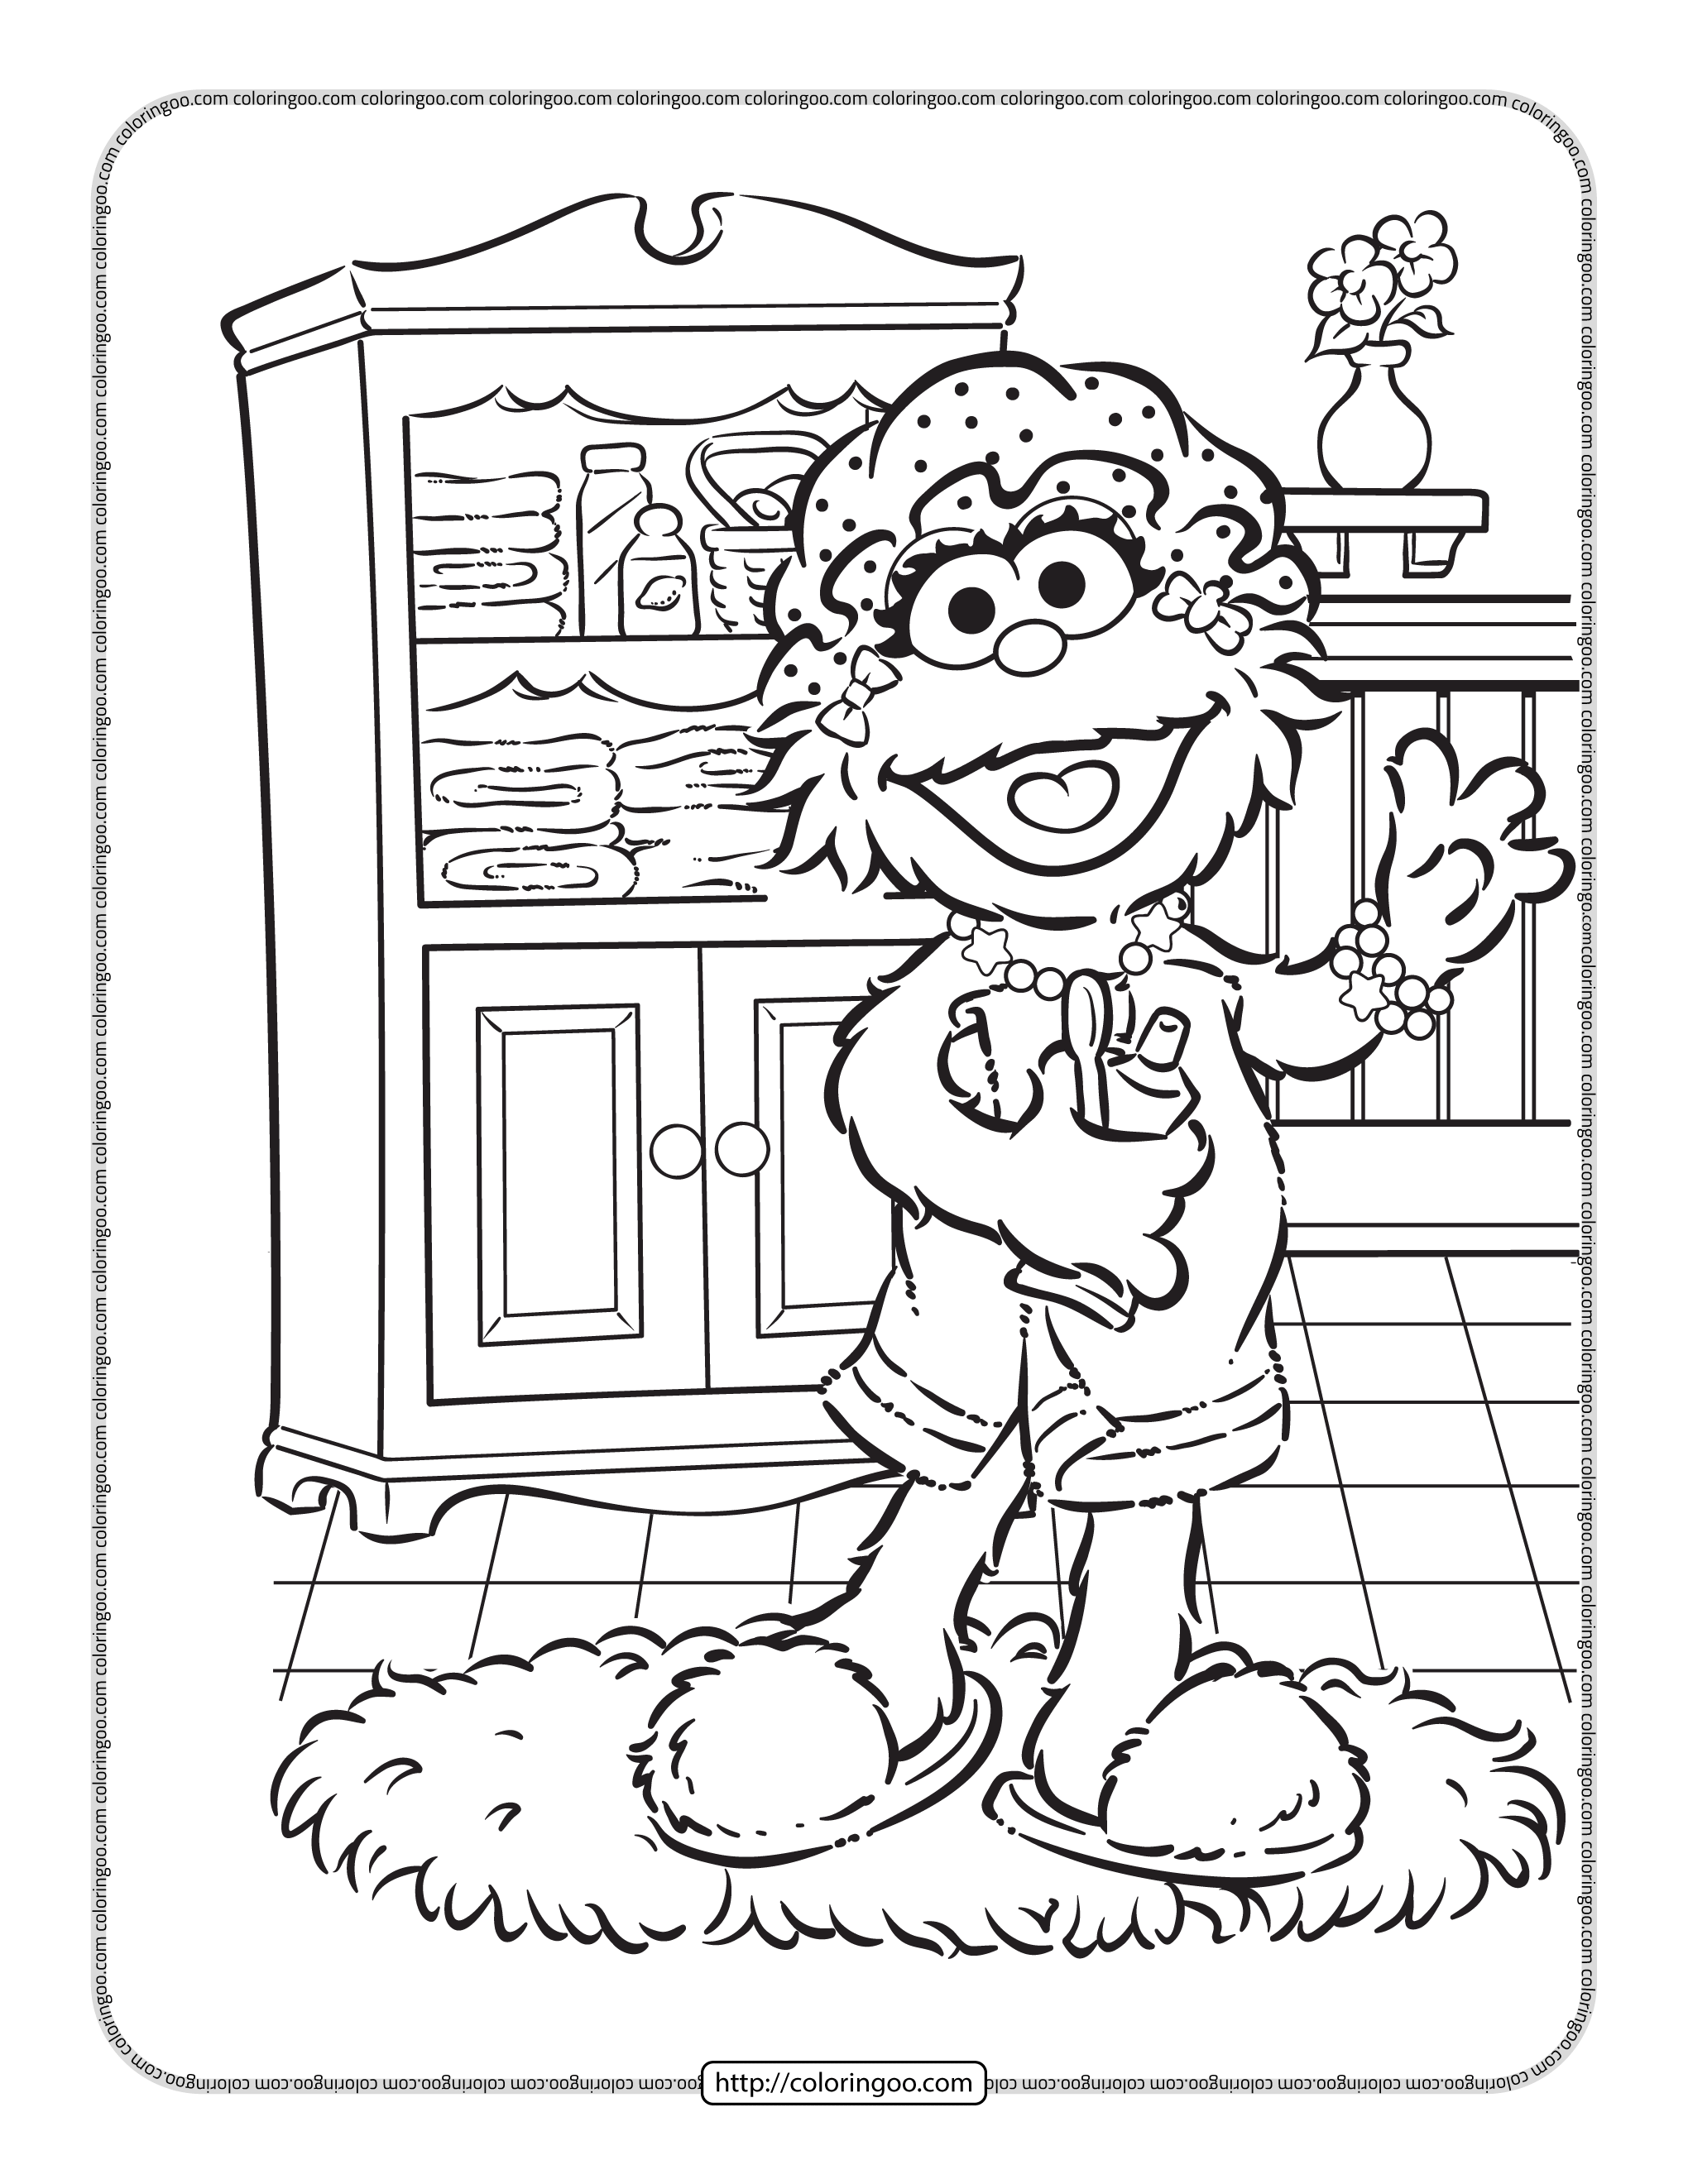 zoe likes to take a bath coloring page